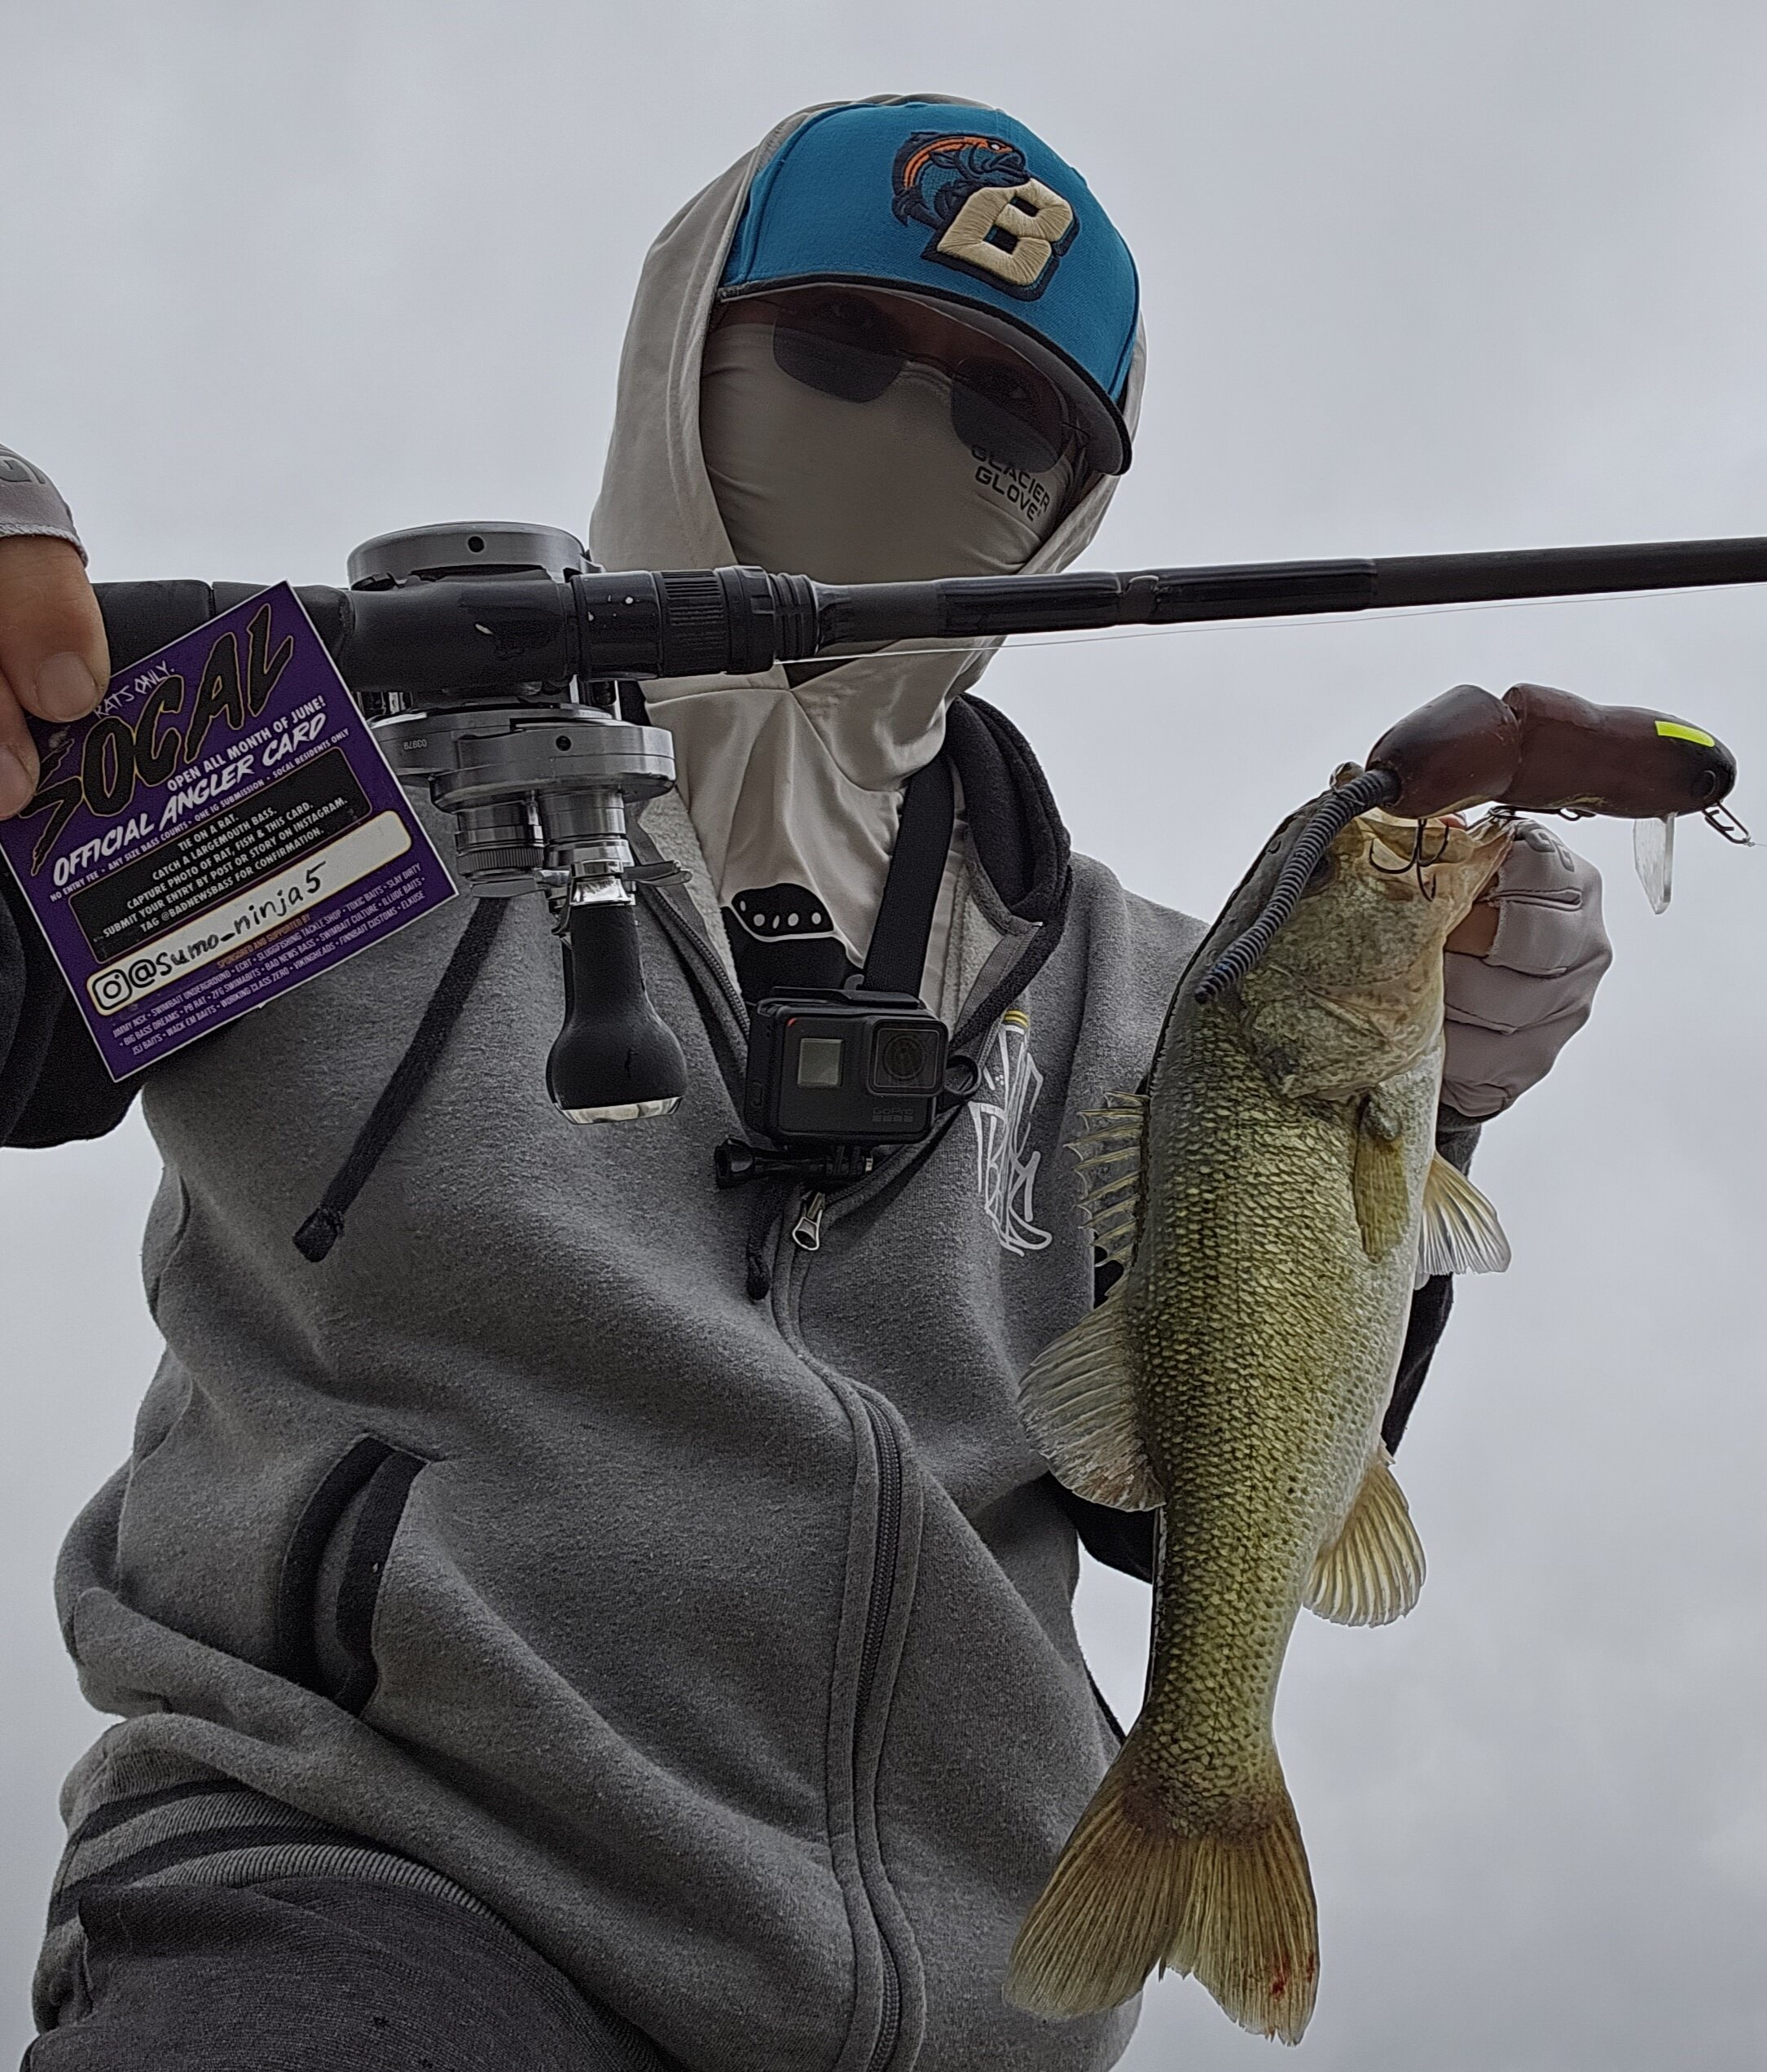 Tackle That Bass on Instagram: “Will This Slay Or Not